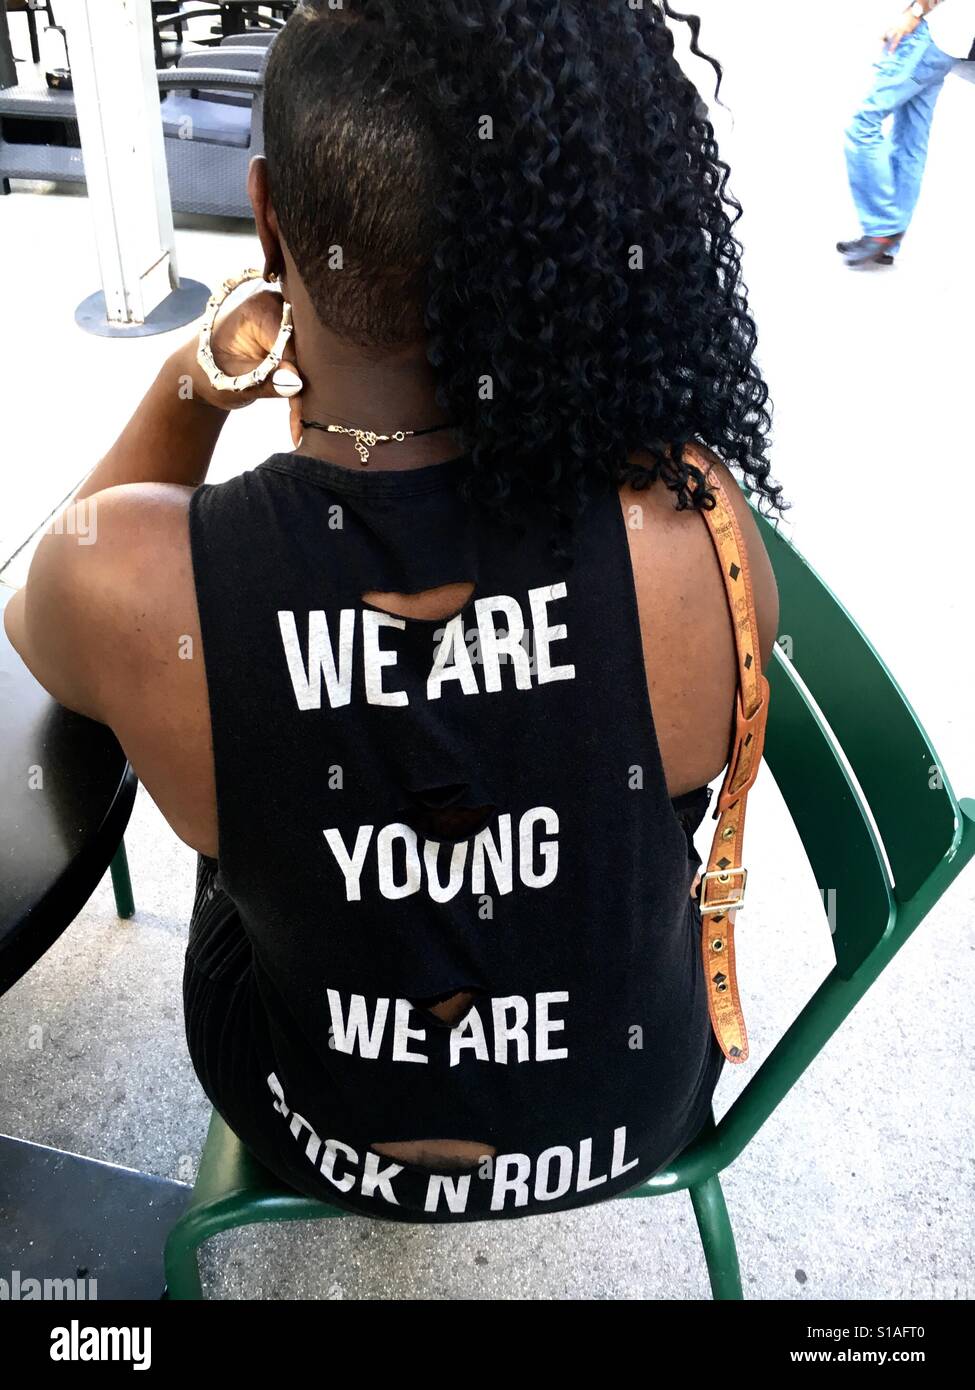 We are young, we are rock n roll Stock Photo